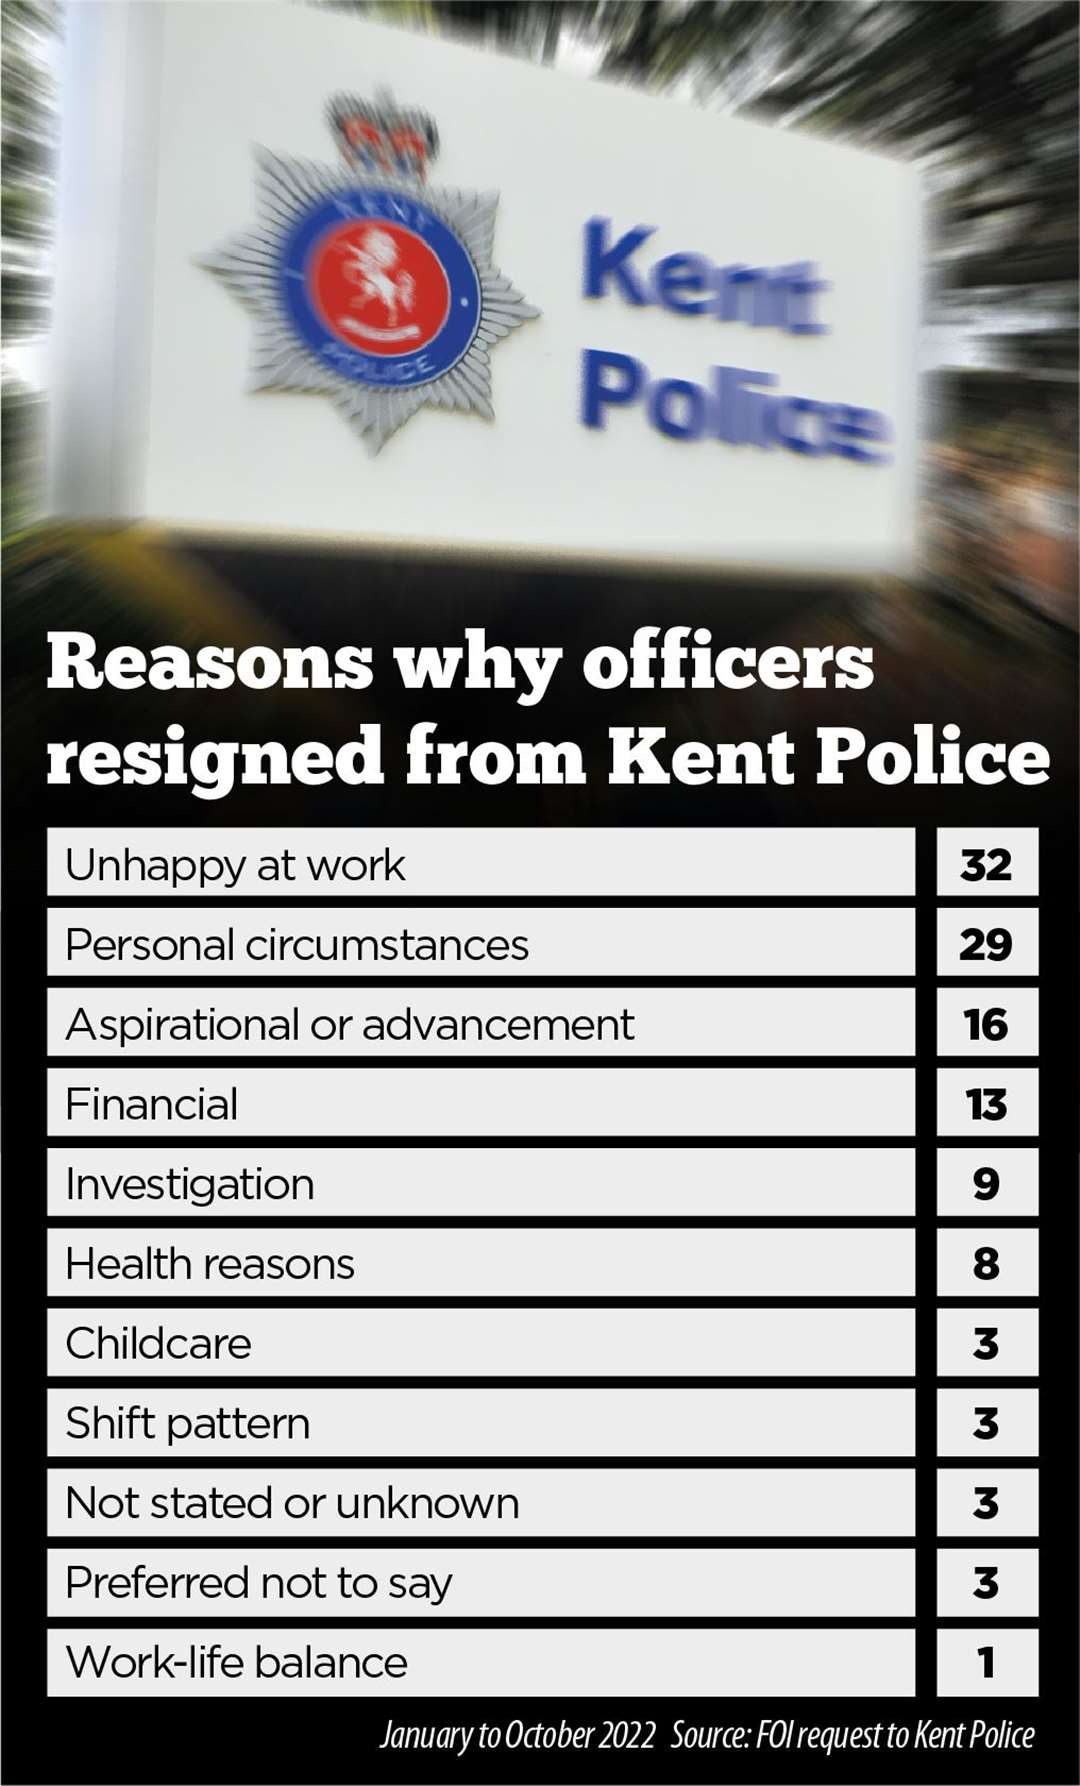 The number of resignations of police officers at Kent Police from January to October 2022